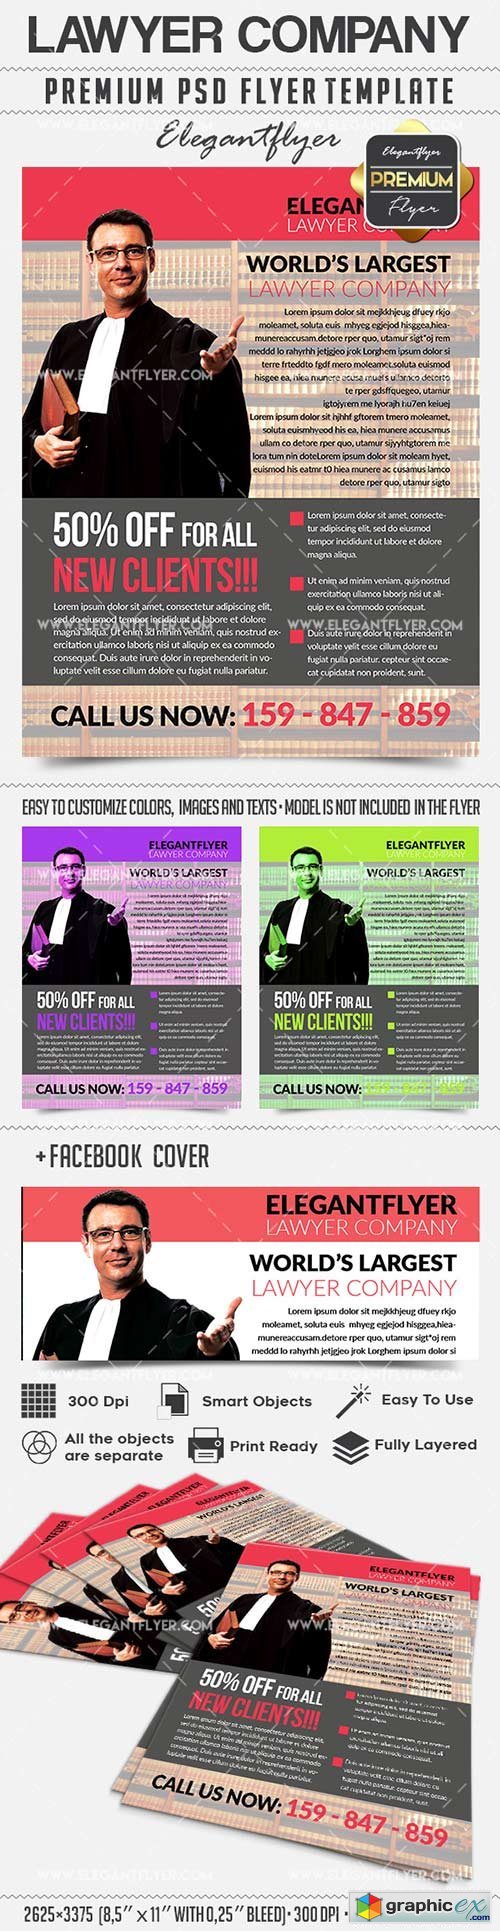 Lawyer Company  Flyer PSD Template + Facebook Cover